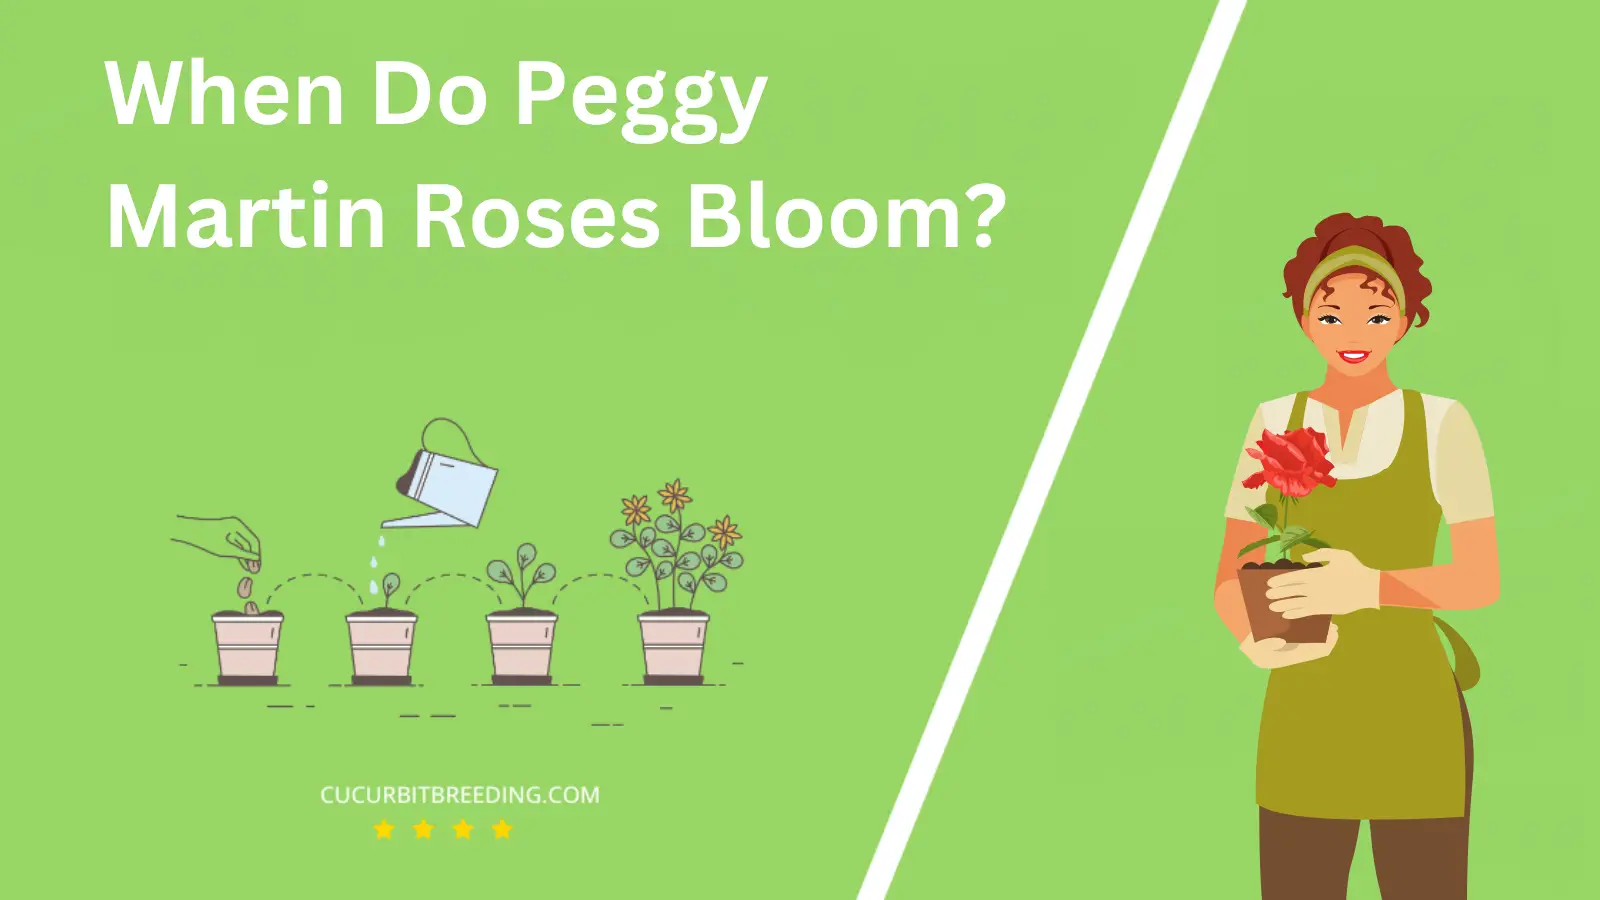 When Do Peggy Martin Roses Bloom?